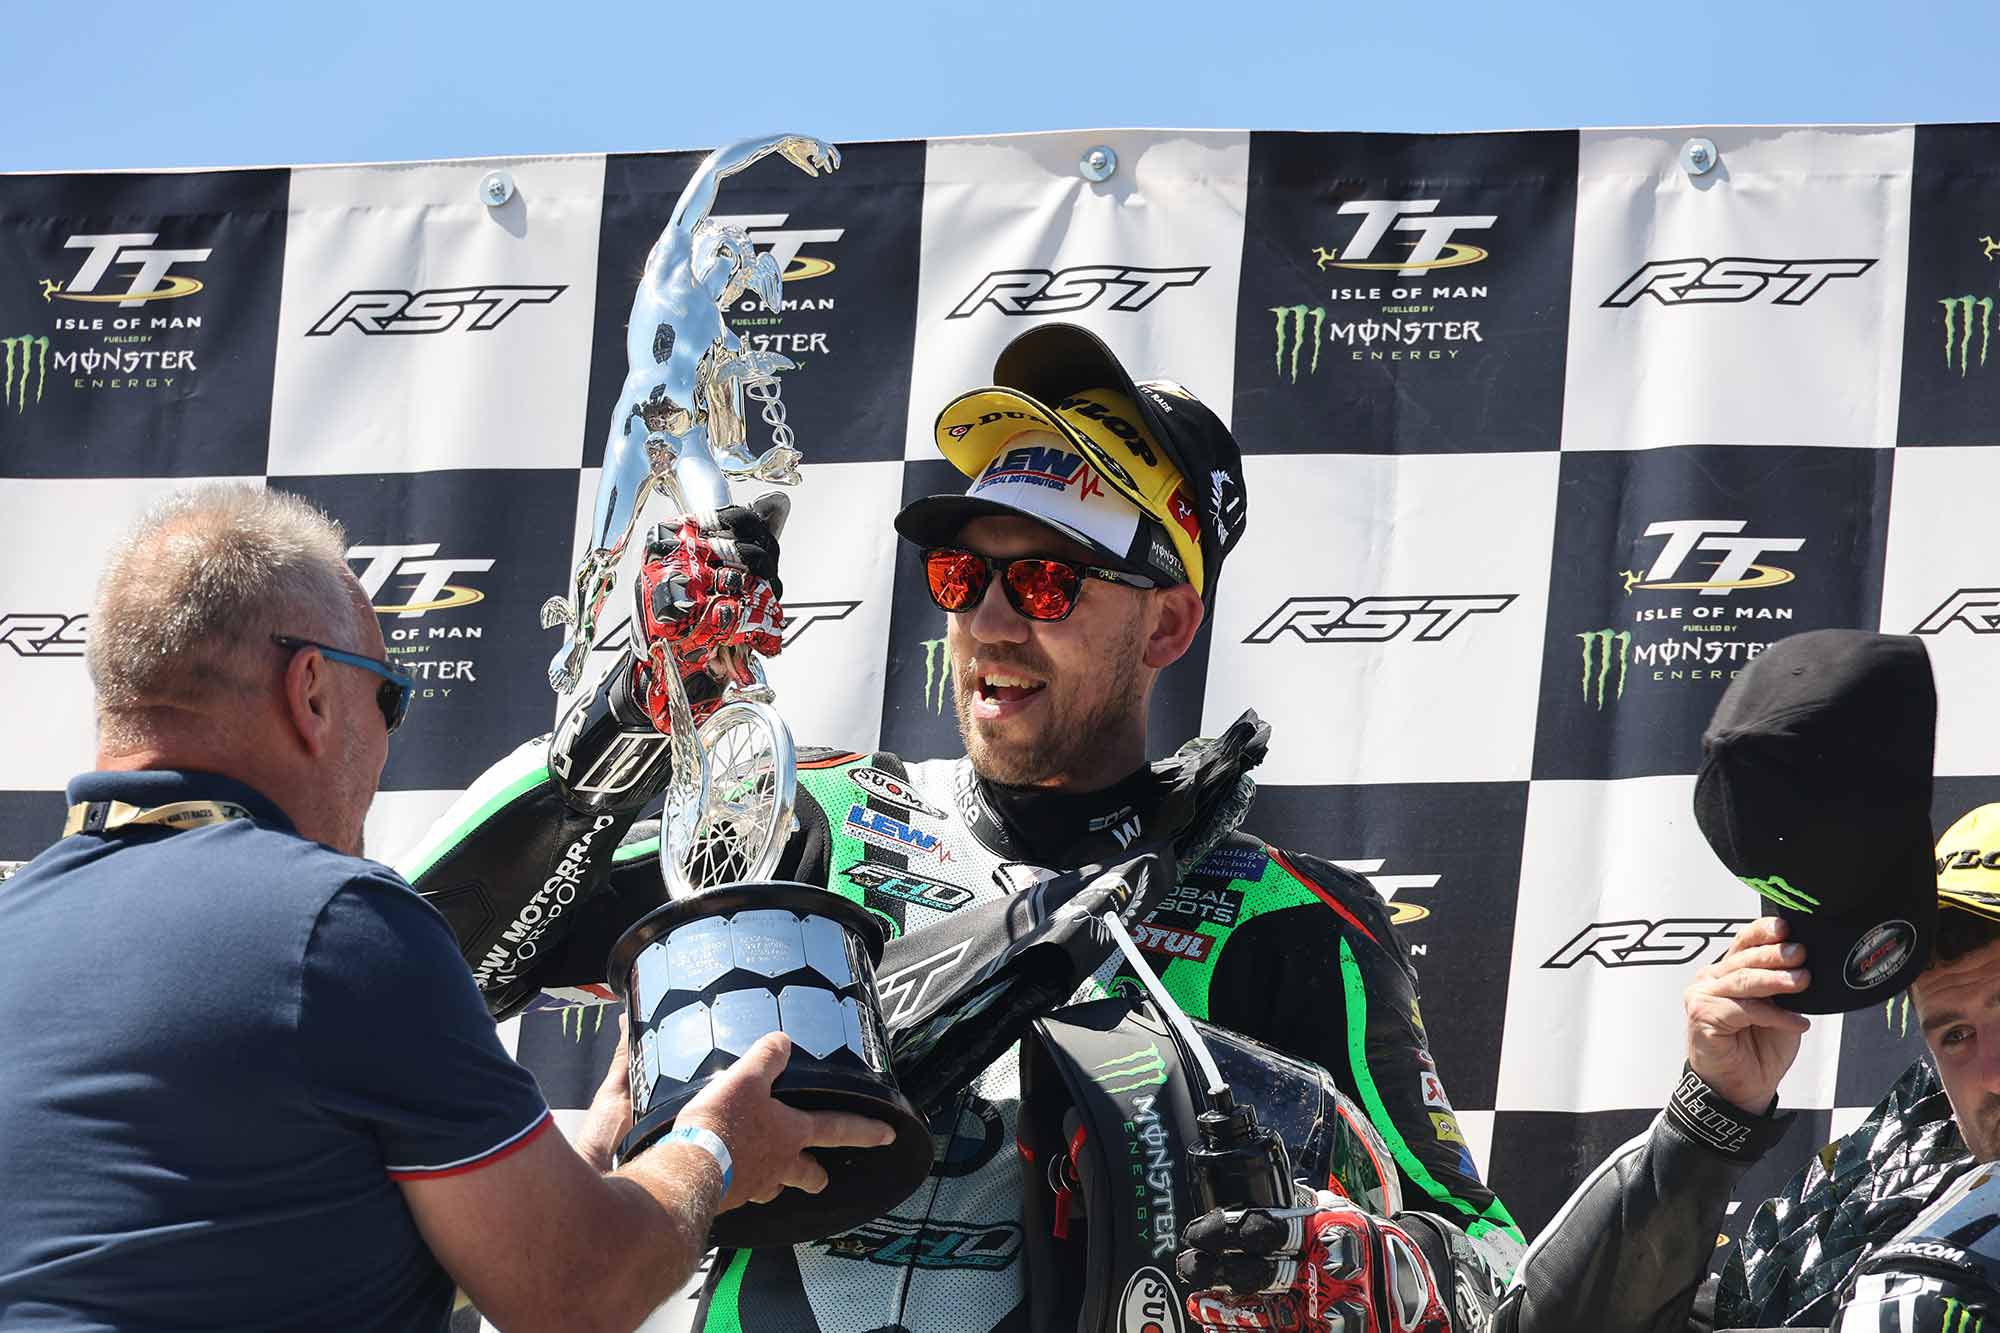 Peter Hickman hoisting one of four trophies (and three sponsor hats) he earned at IoM TT.